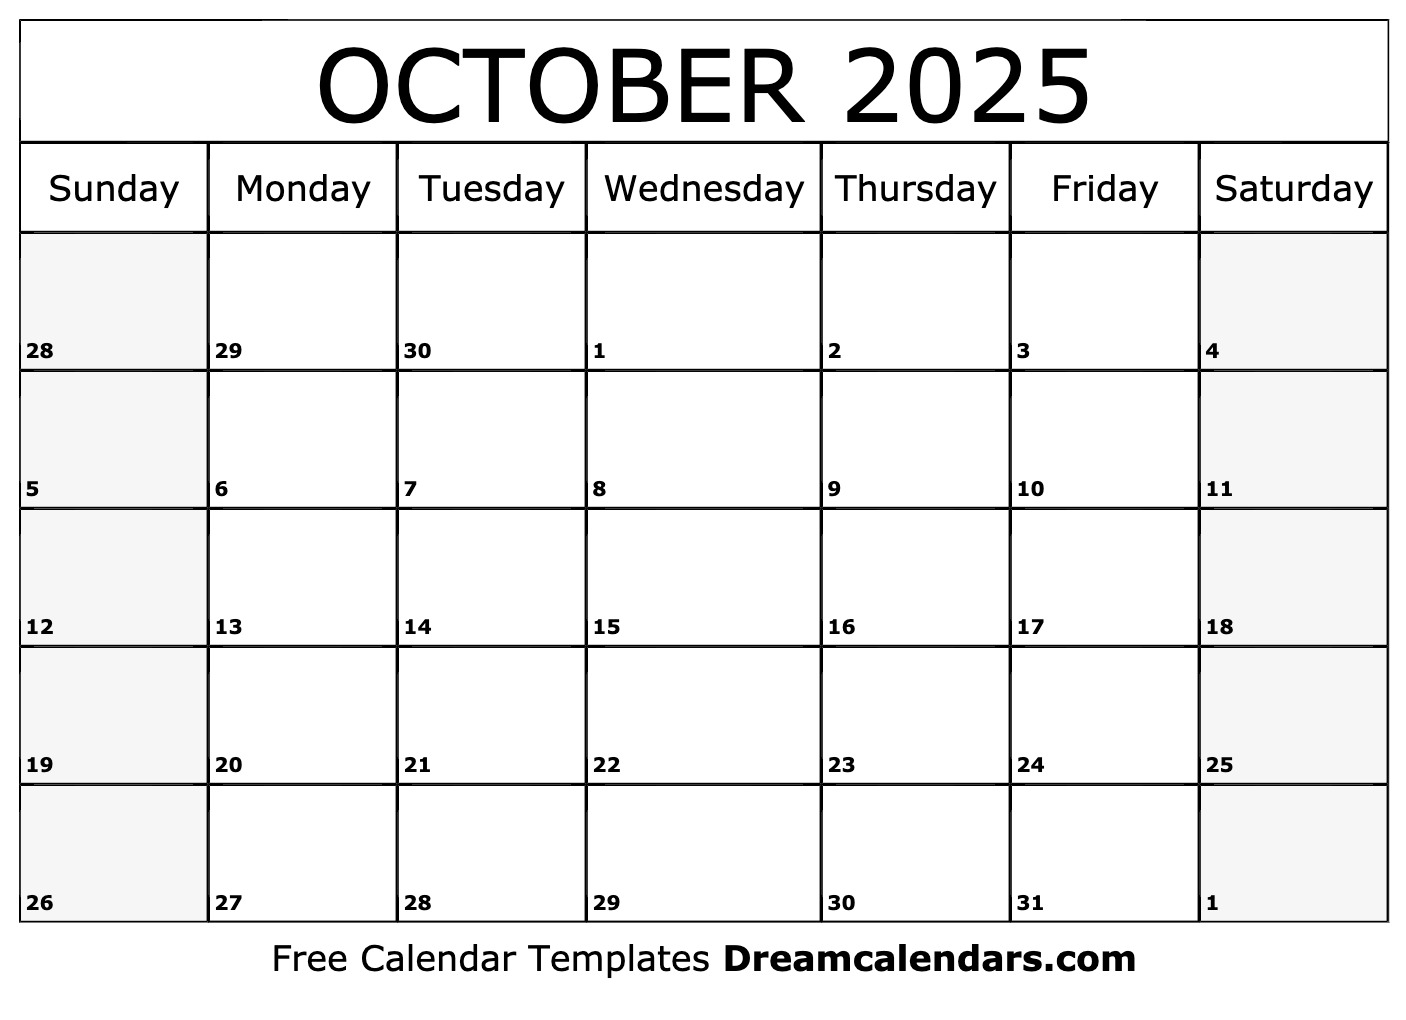 October 2025 Calendar Free Blank Printable With Holidays